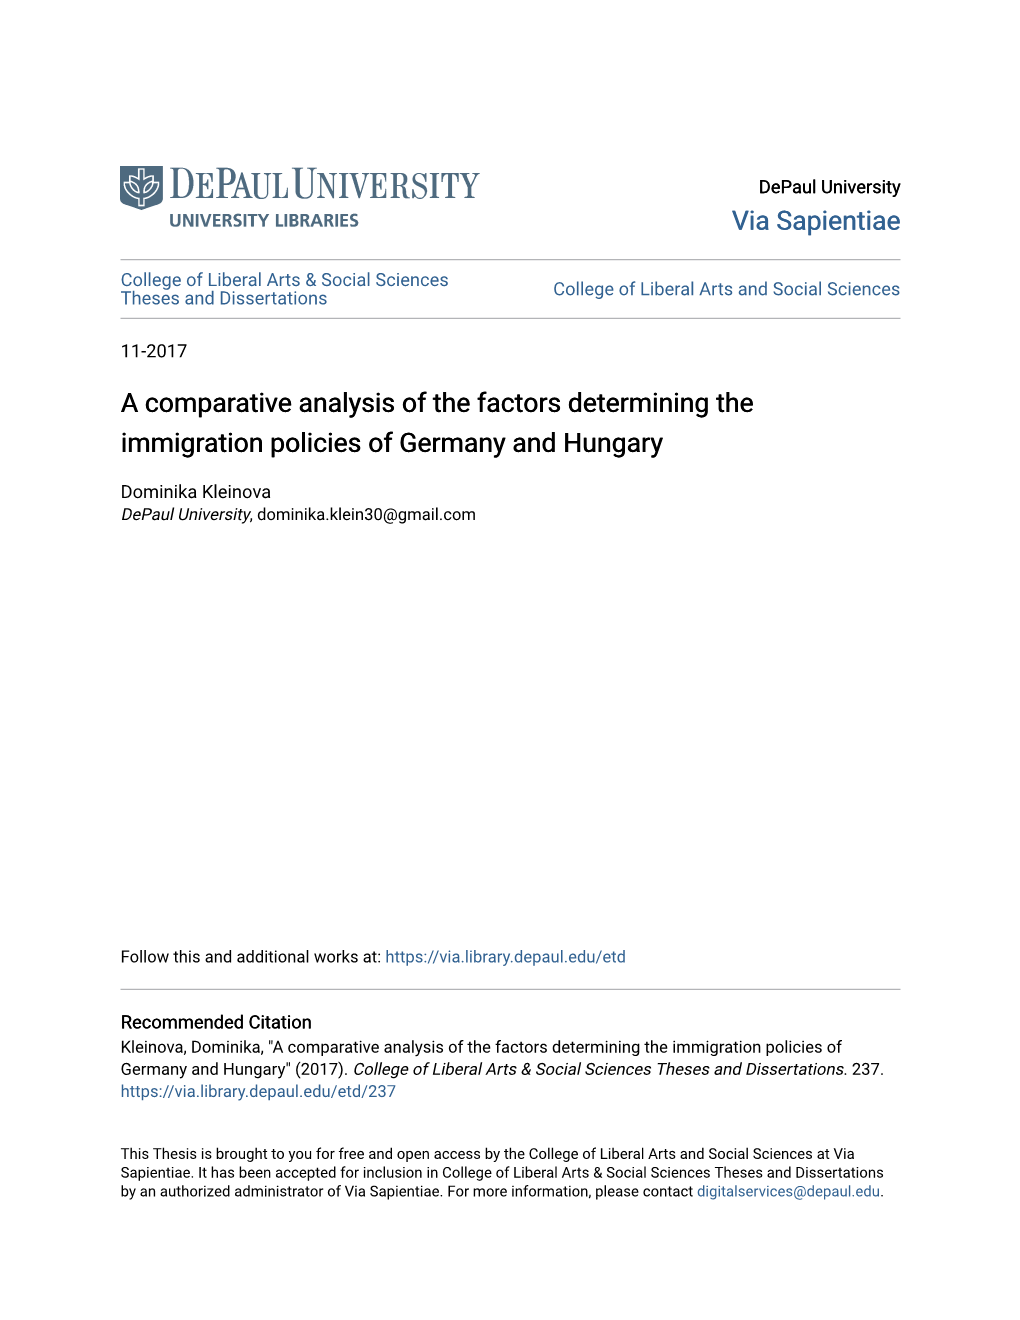 A Comparative Analysis of the Factors Determining the Immigration Policies of Germany and Hungary